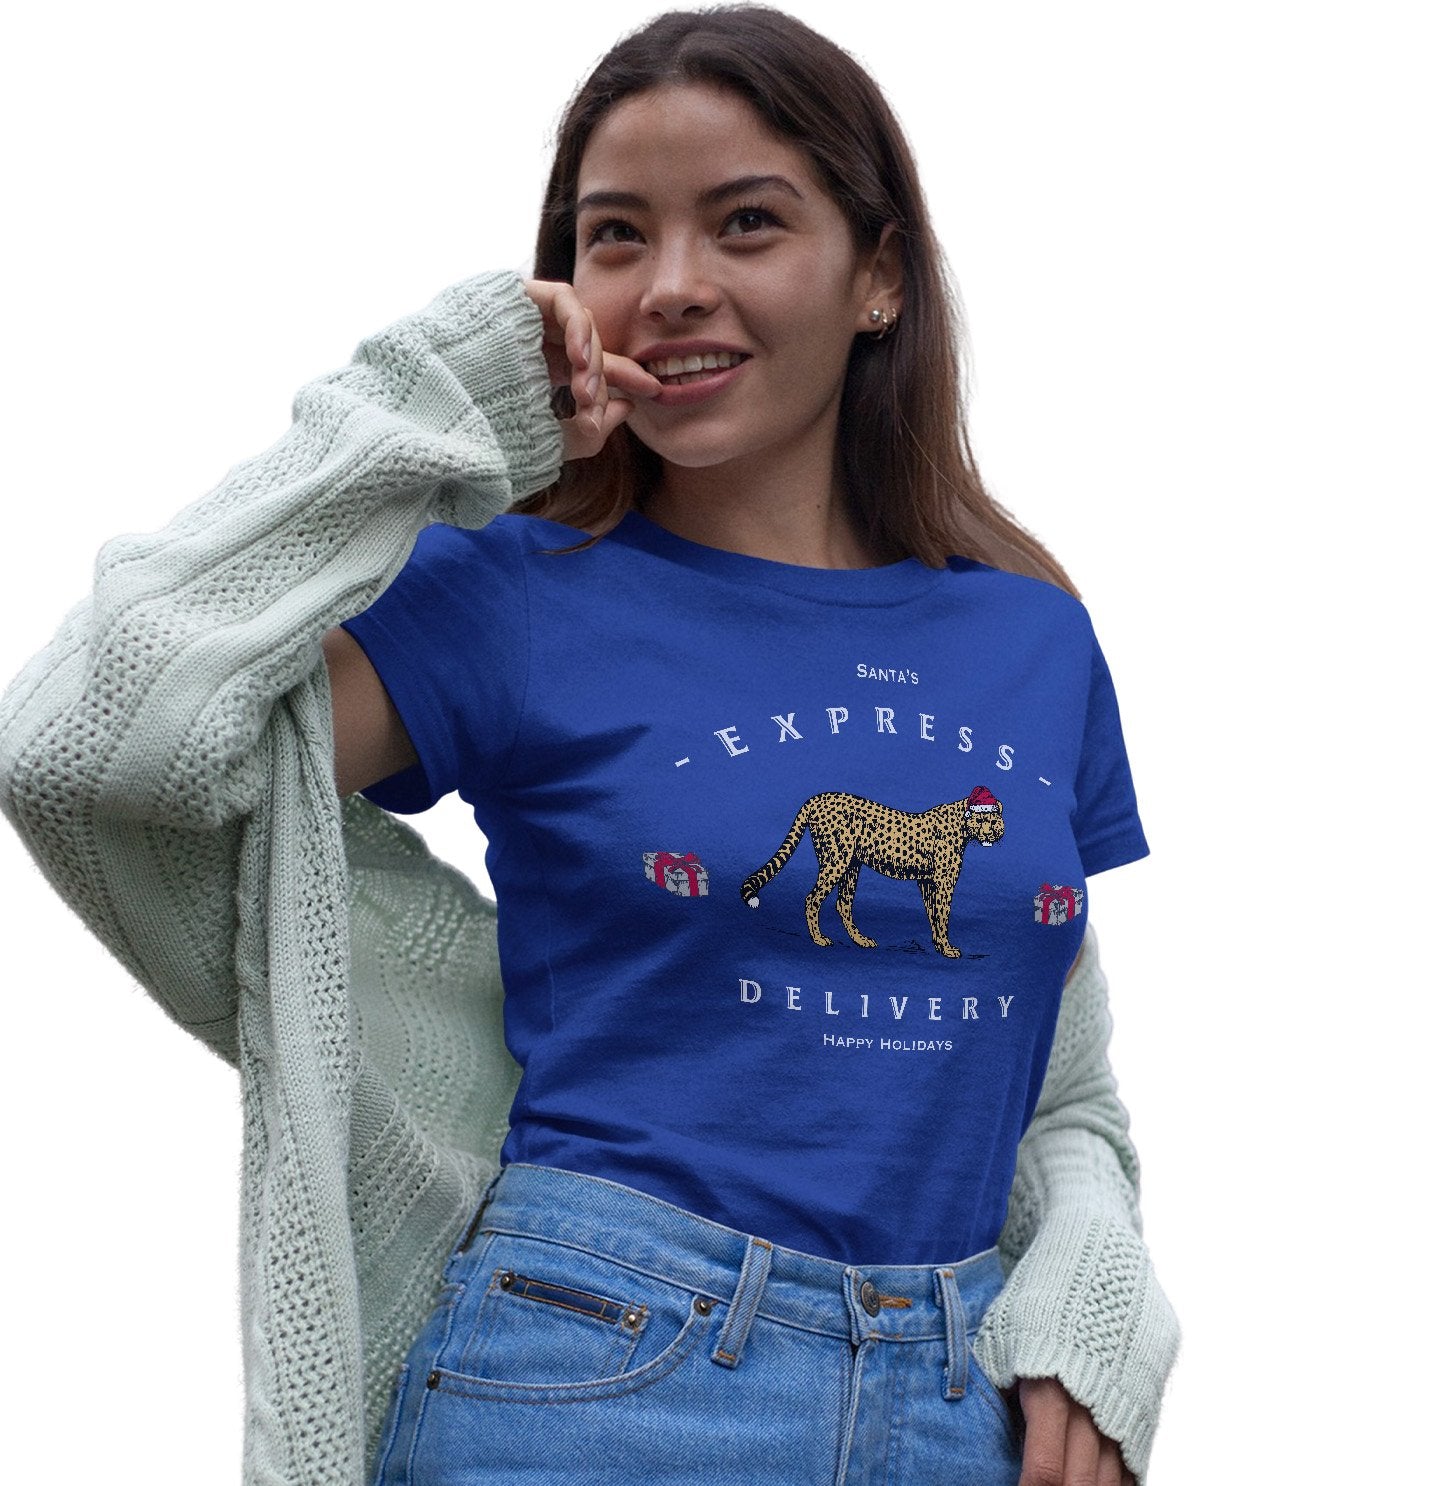 Cheetah Express Delivery - Women's Fitted T-Shirt